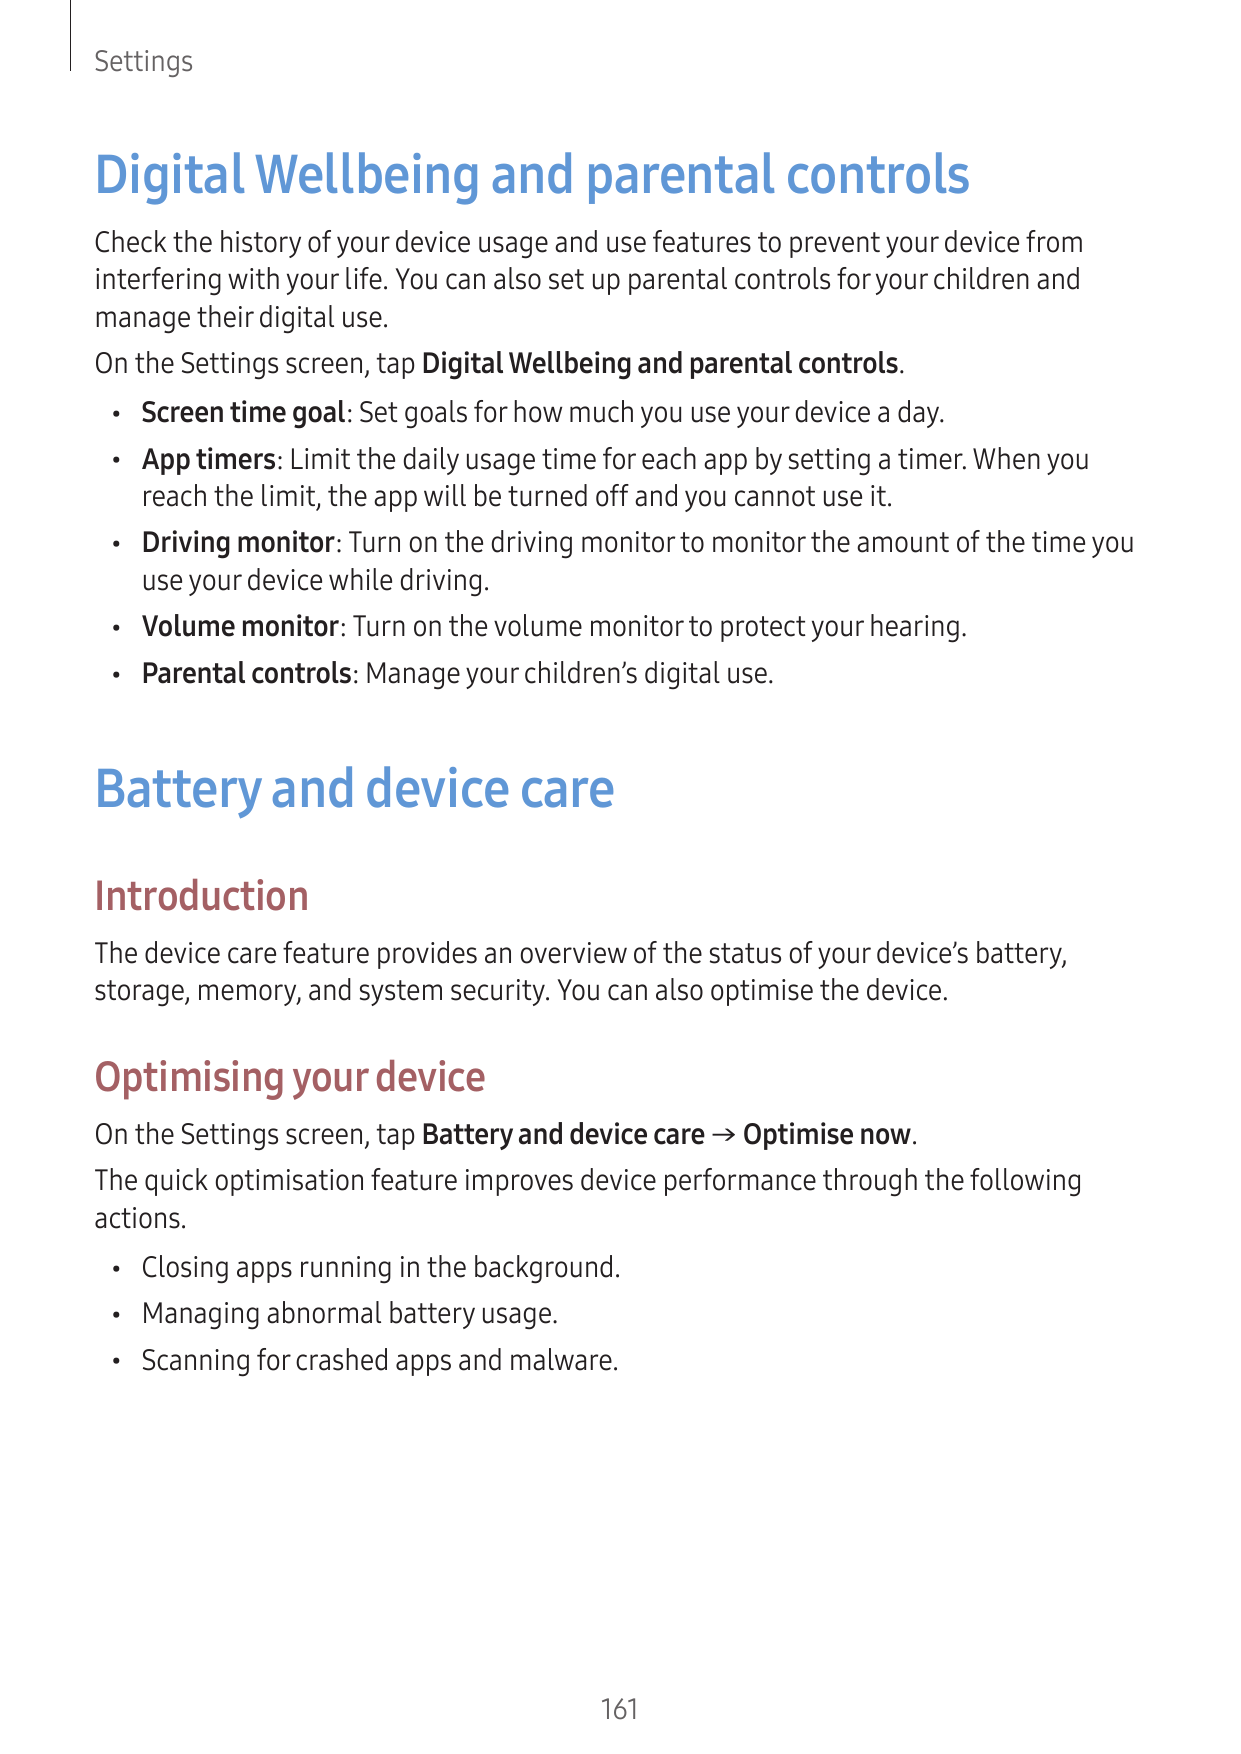 SettingsDigital Wellbeing and parental controlsCheck the history of your device usage and use features to prevent your device fr